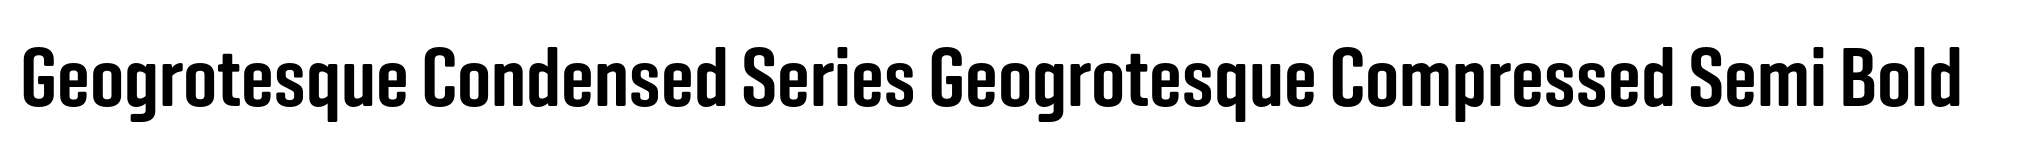 Geogrotesque Condensed Series Geogrotesque Compressed Semi Bold image